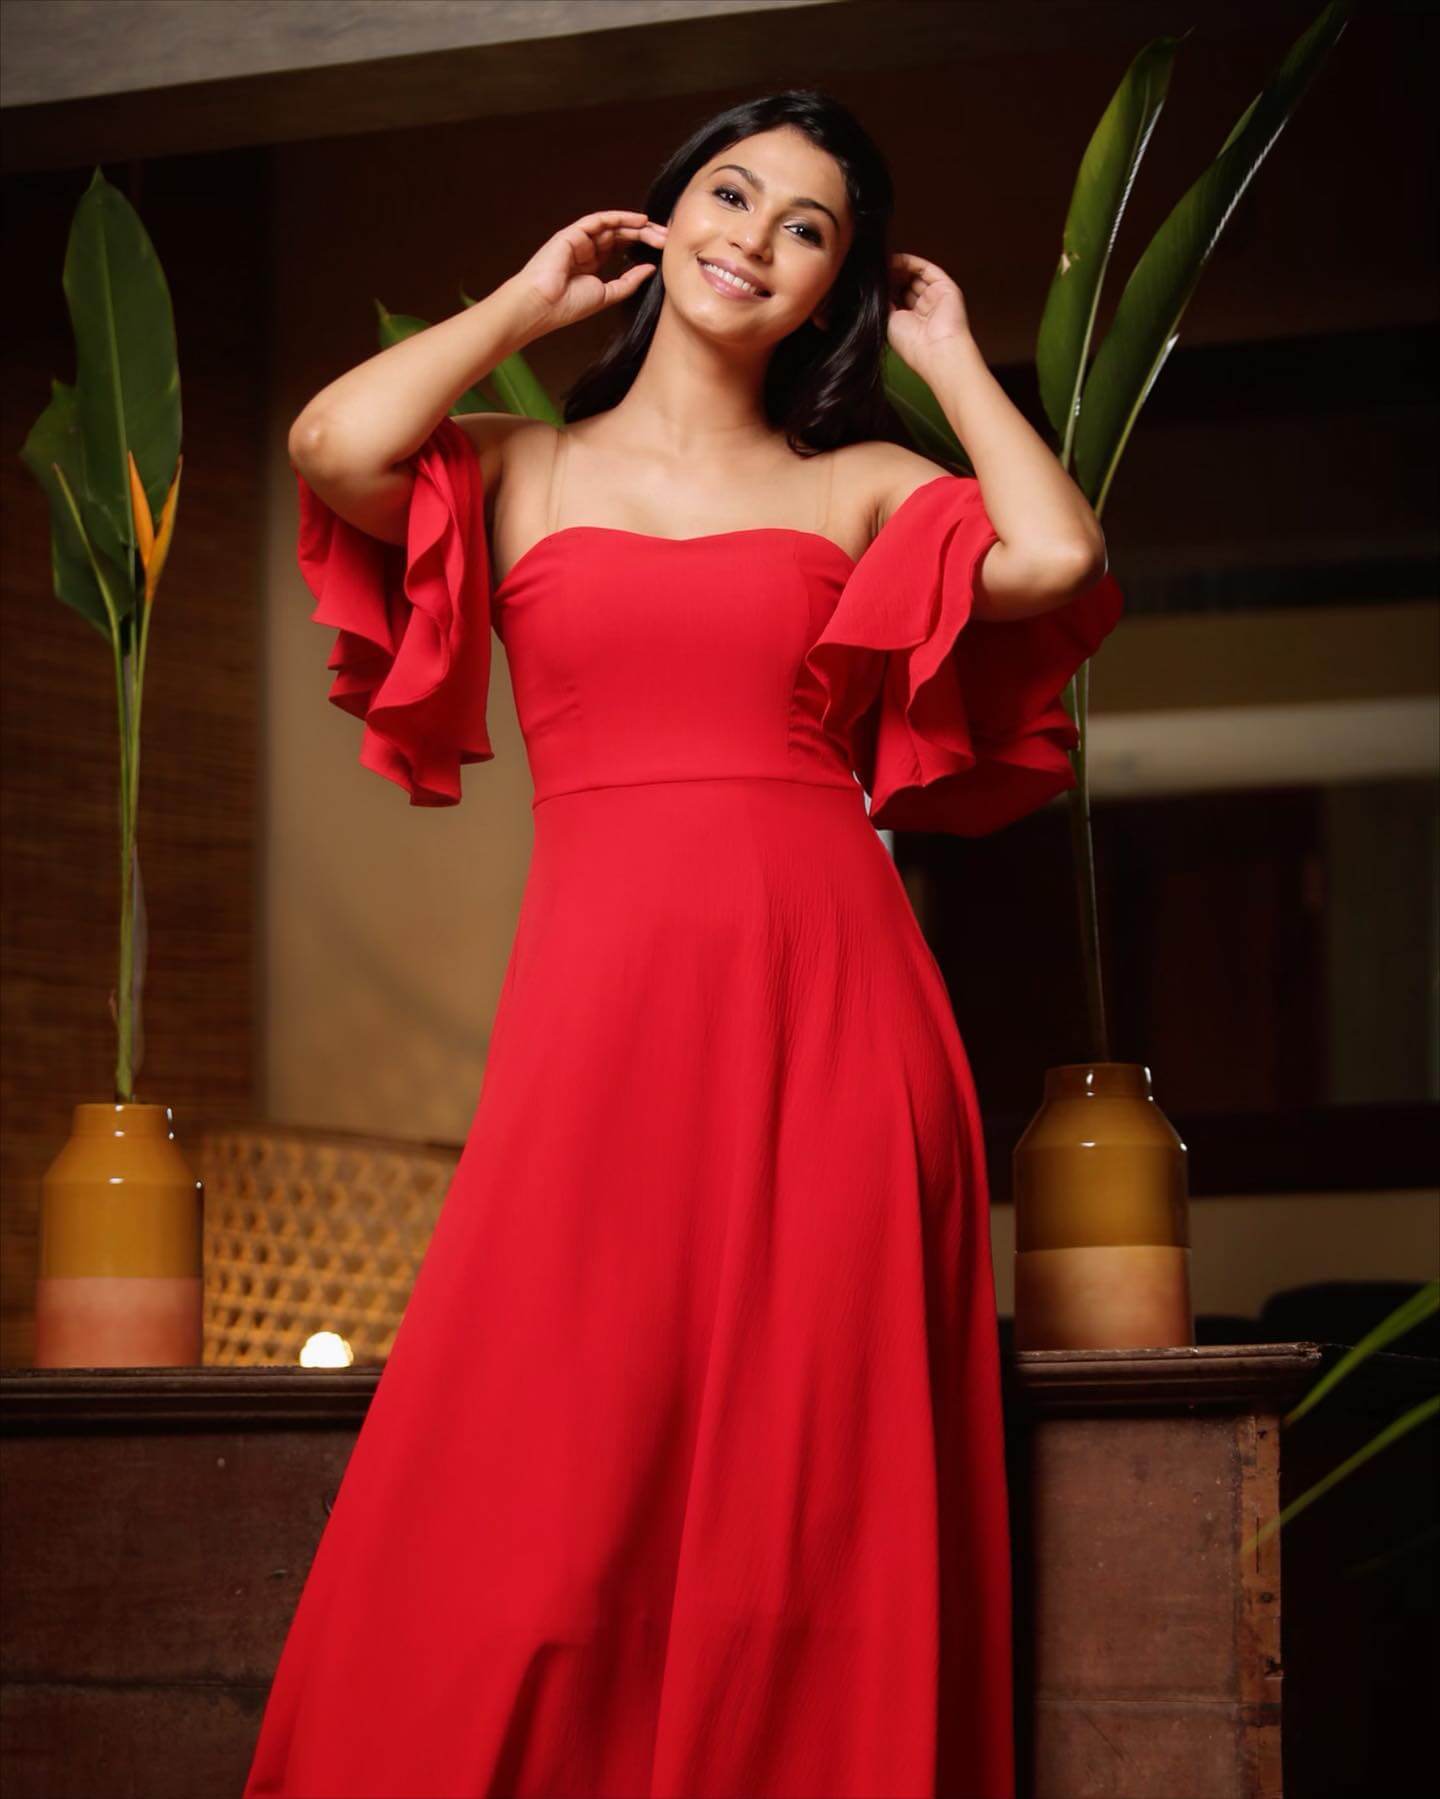 Darbar Fame Shamata Anchan In Hot Red Sweetheart Neckline Off Shoulder Dress Perfect Date Look Inspo